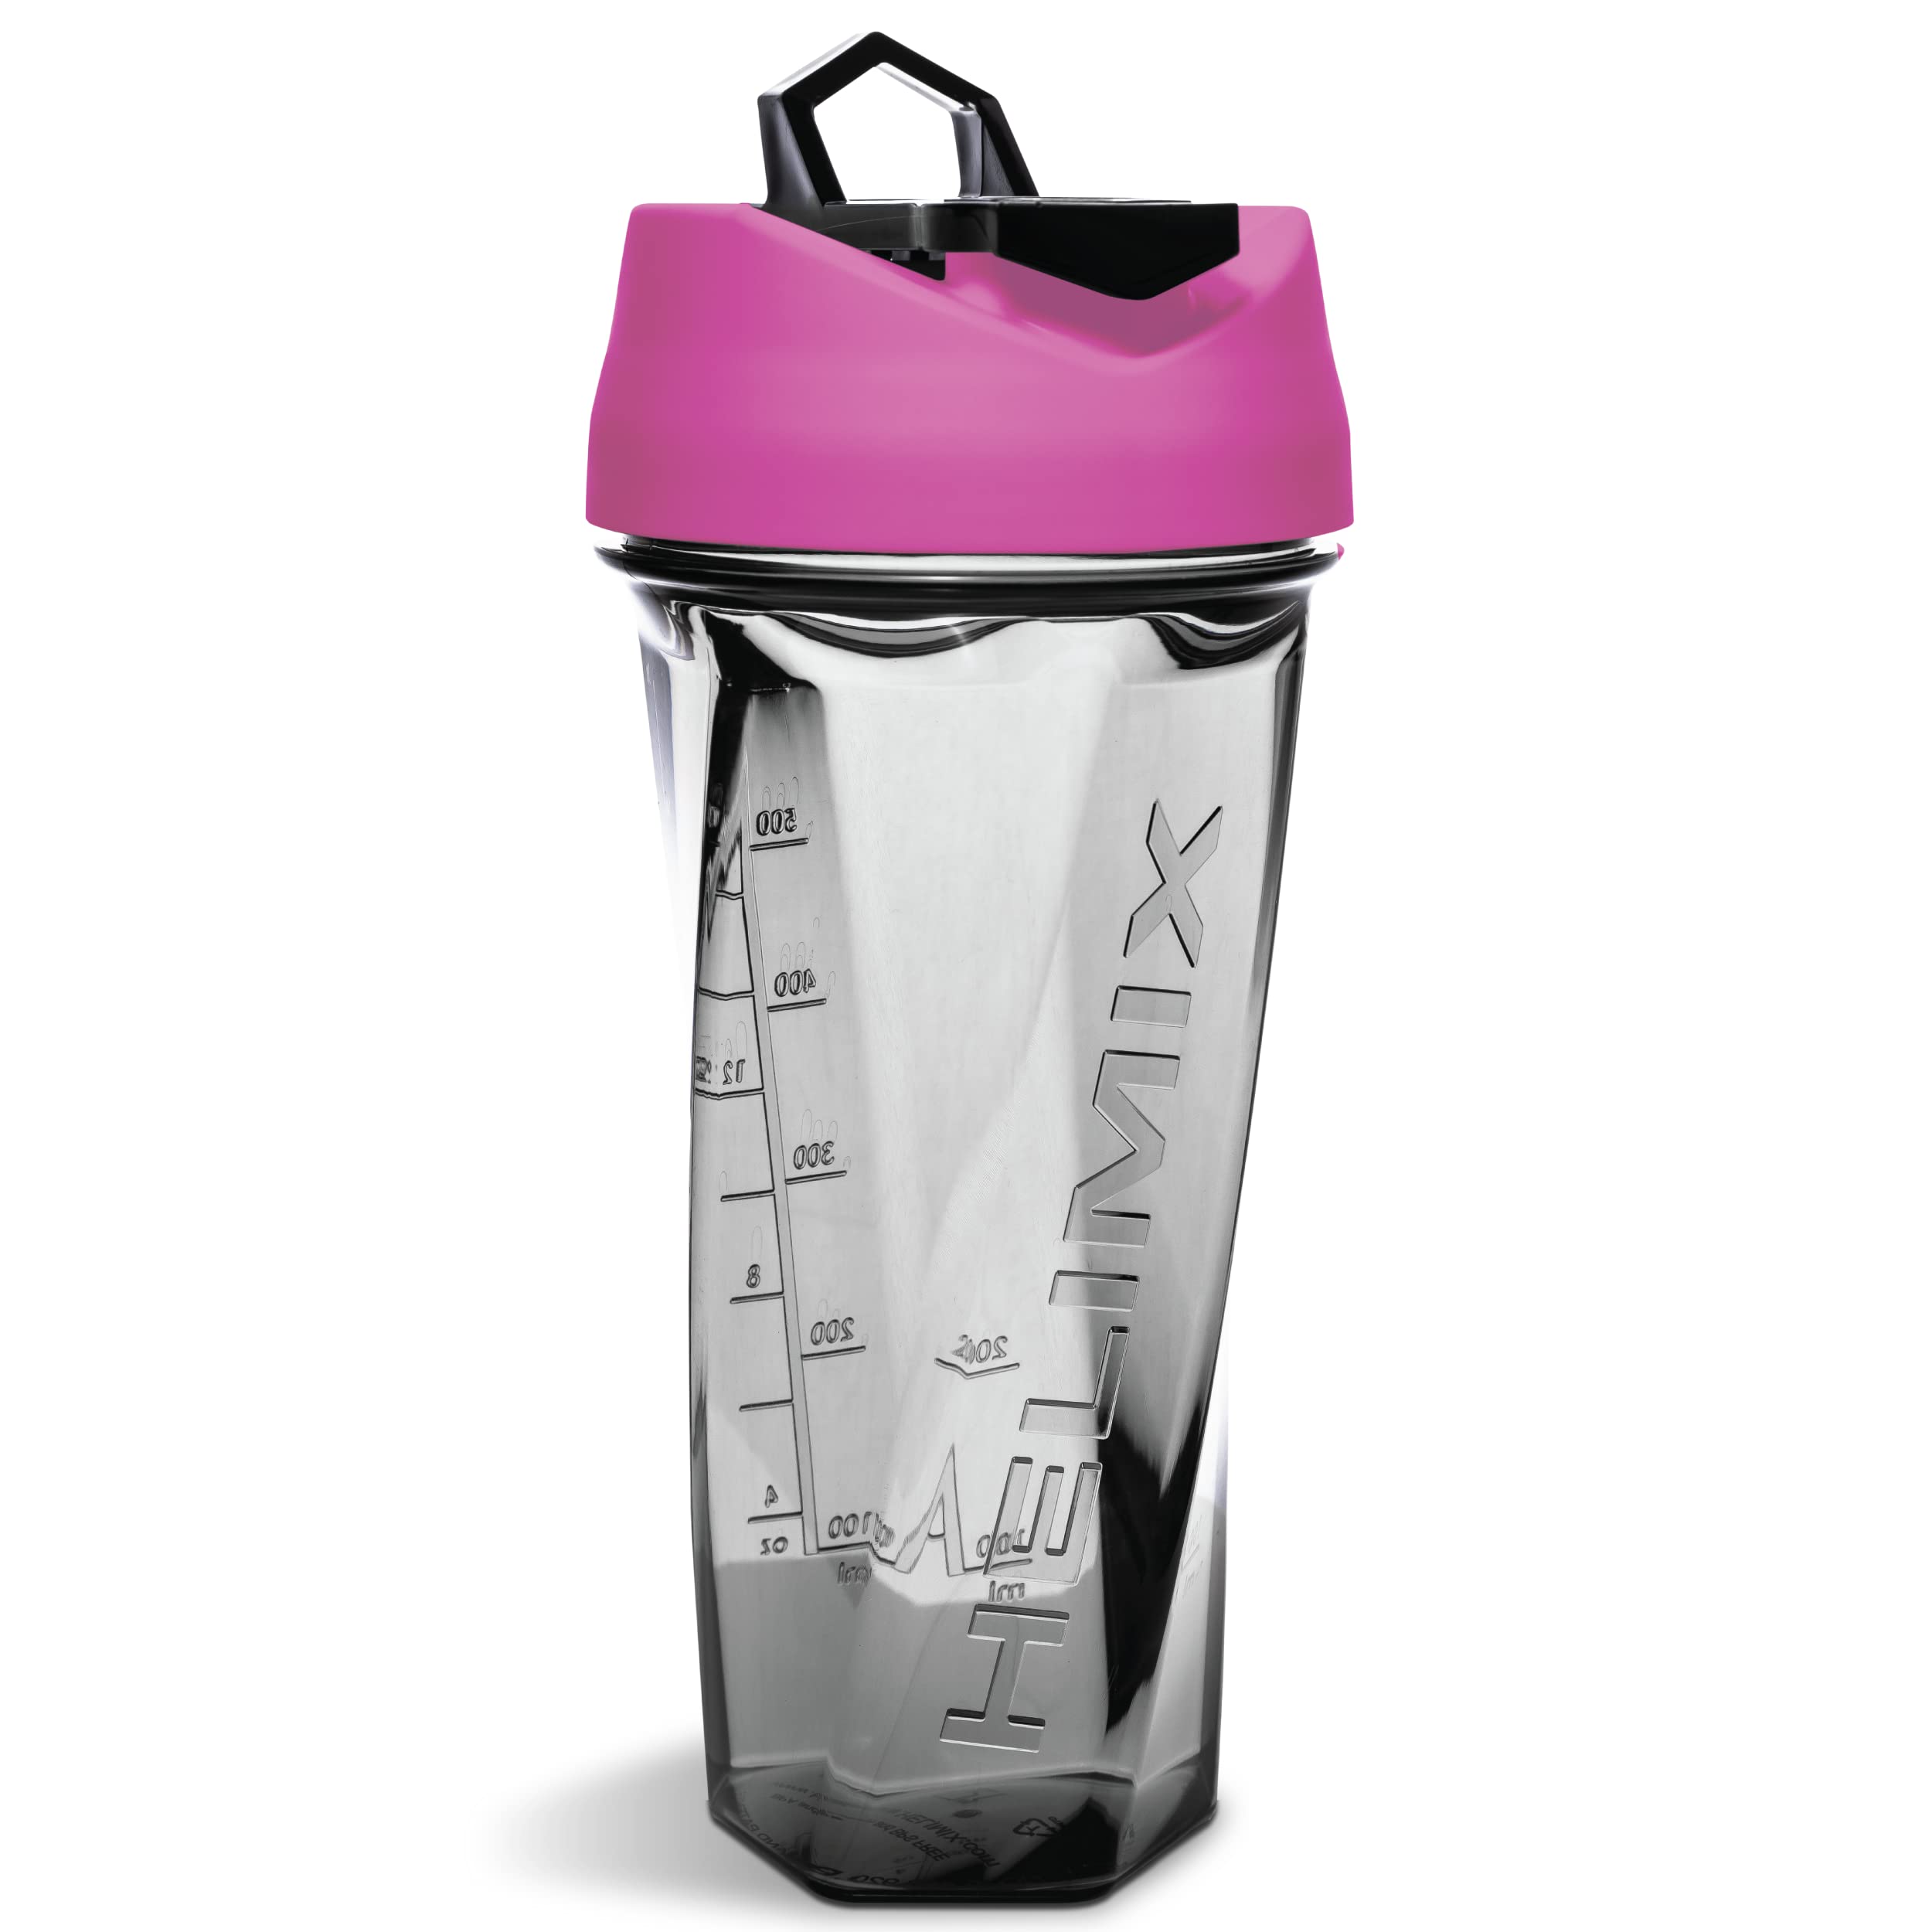 Helimix Vortex Blender Shaker Bottle 28oz | No Blending Ball or Whisk Needed | USA Made | Portable Pre Workout Whey Protein Drink Shaker Cup | Mixes Cocktails Smoothies Shakes | Dishwasher Safe